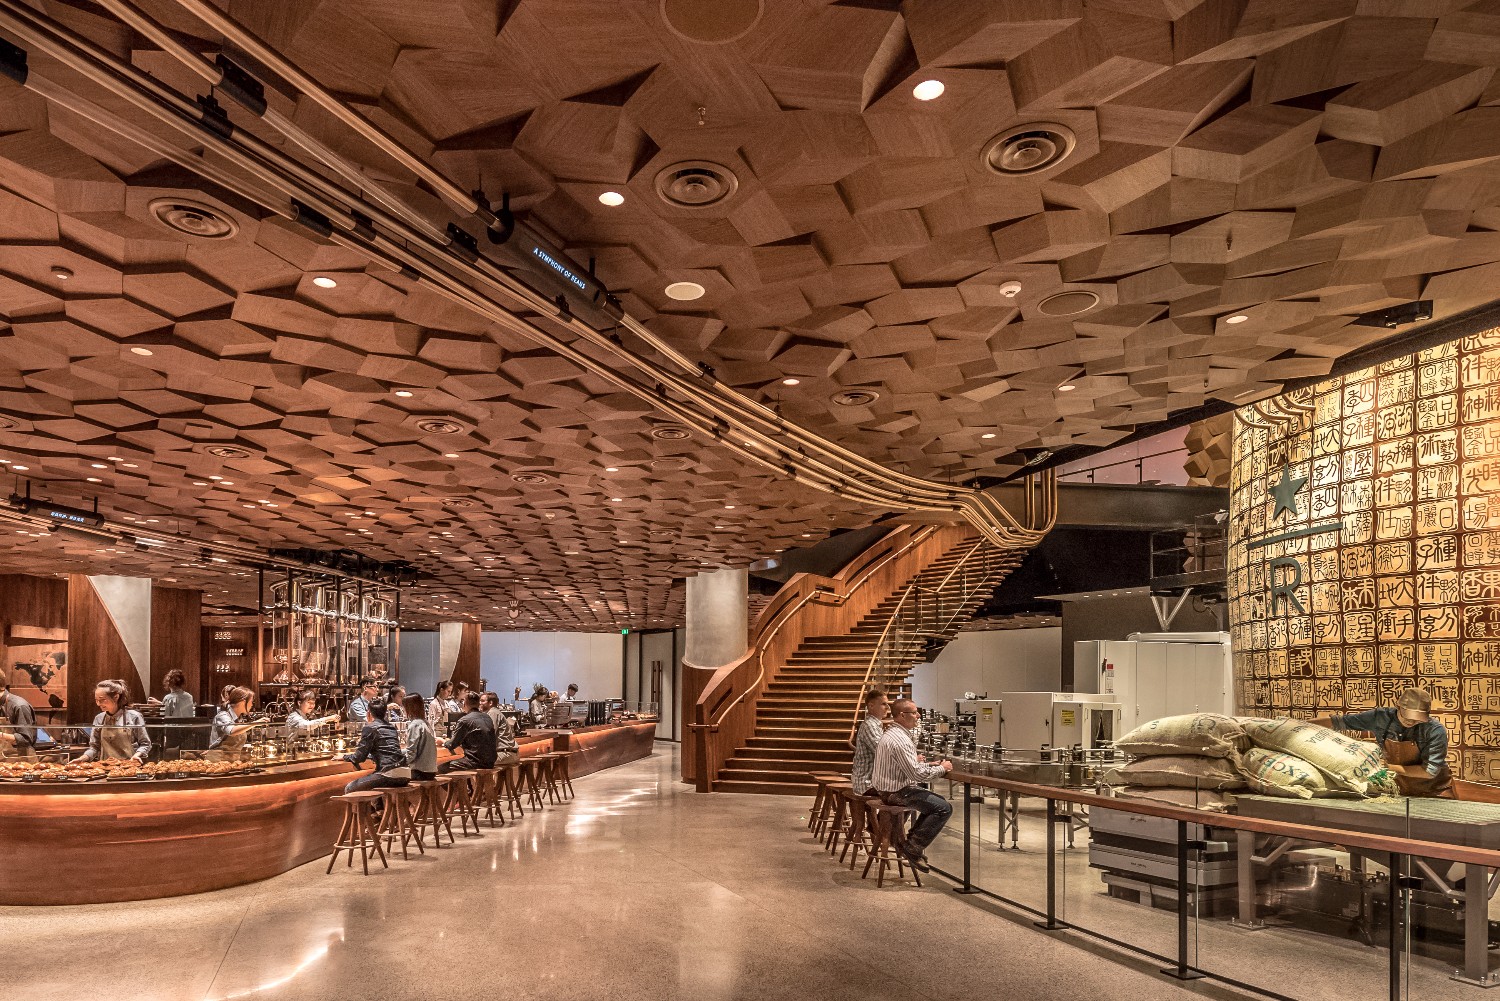 Starbucks promises a multisensory experience at its largest store to date in Shanghai